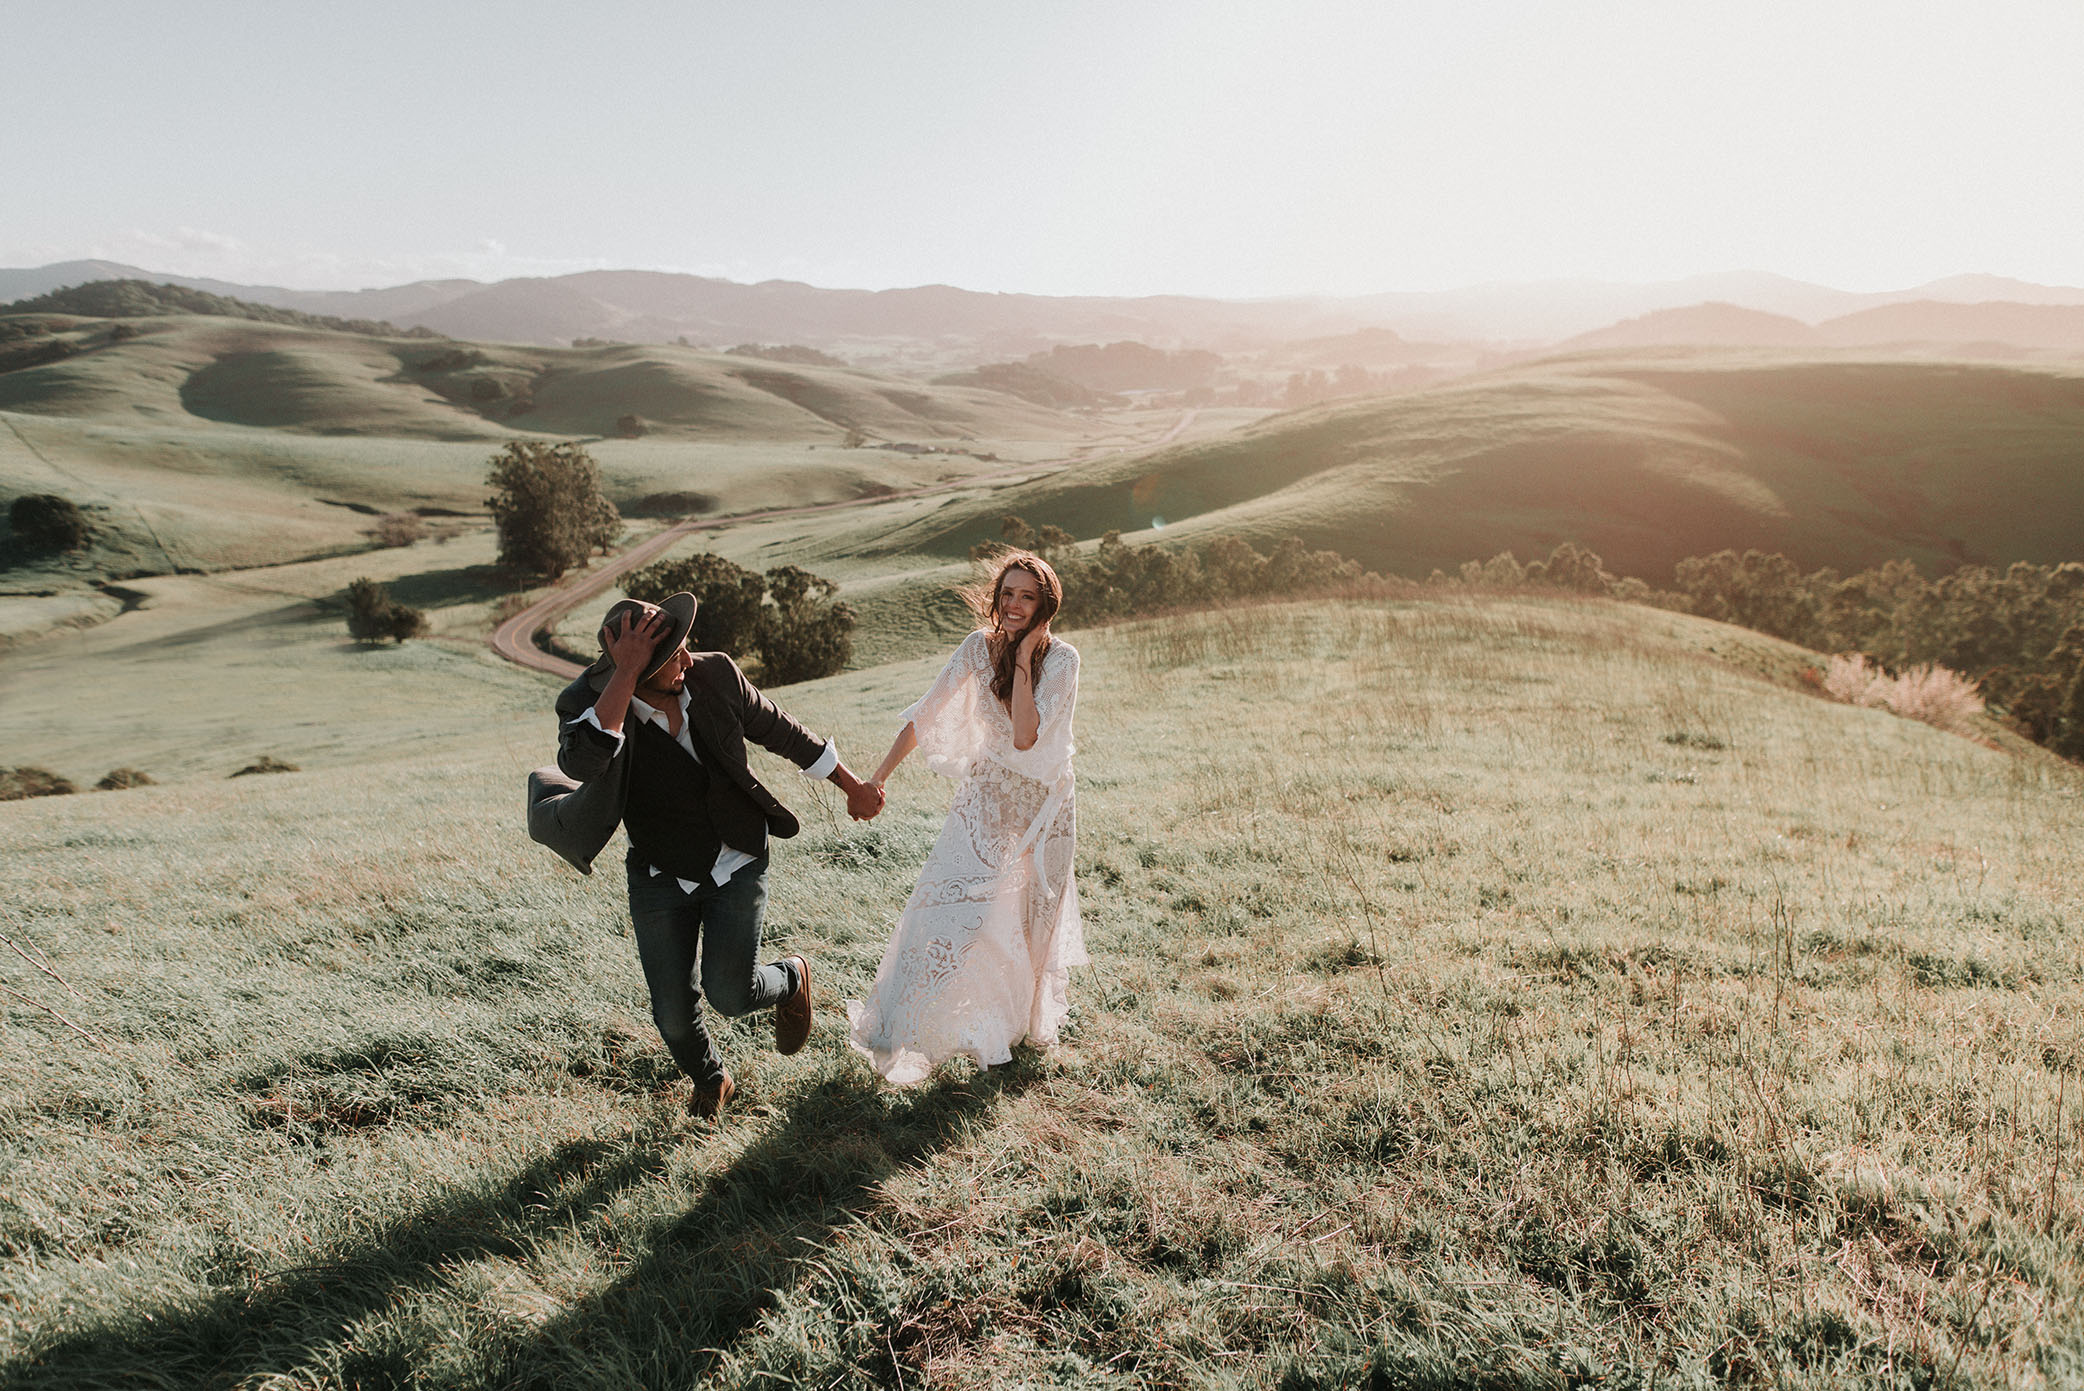 A couple walks in a field together